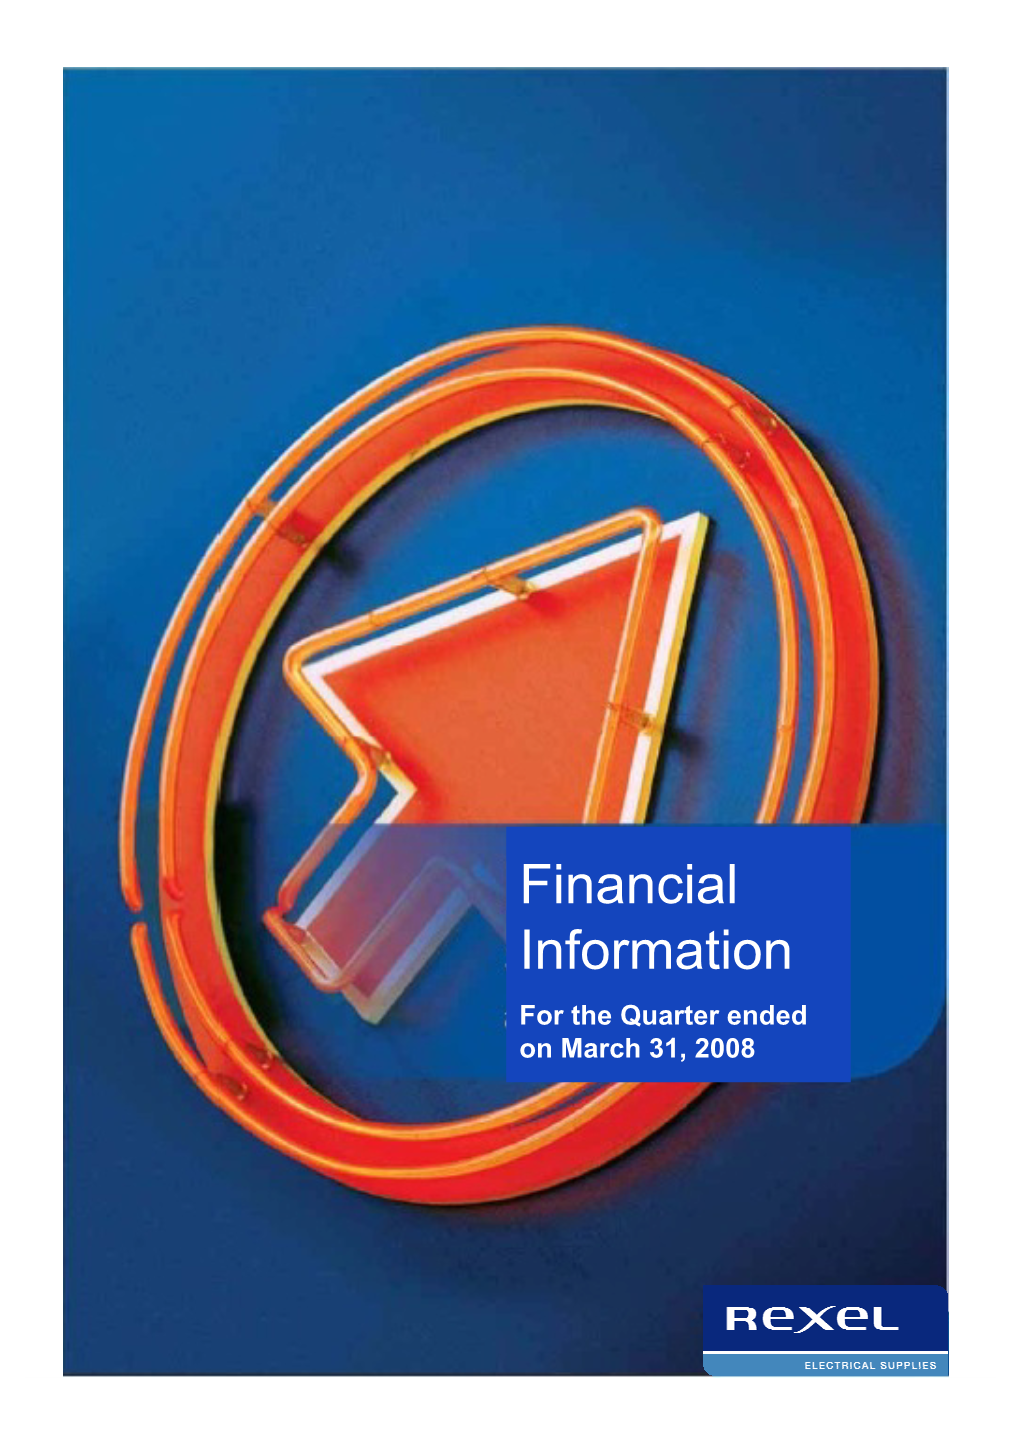 Financial Information for the Quarter Ended on March 31, 2008